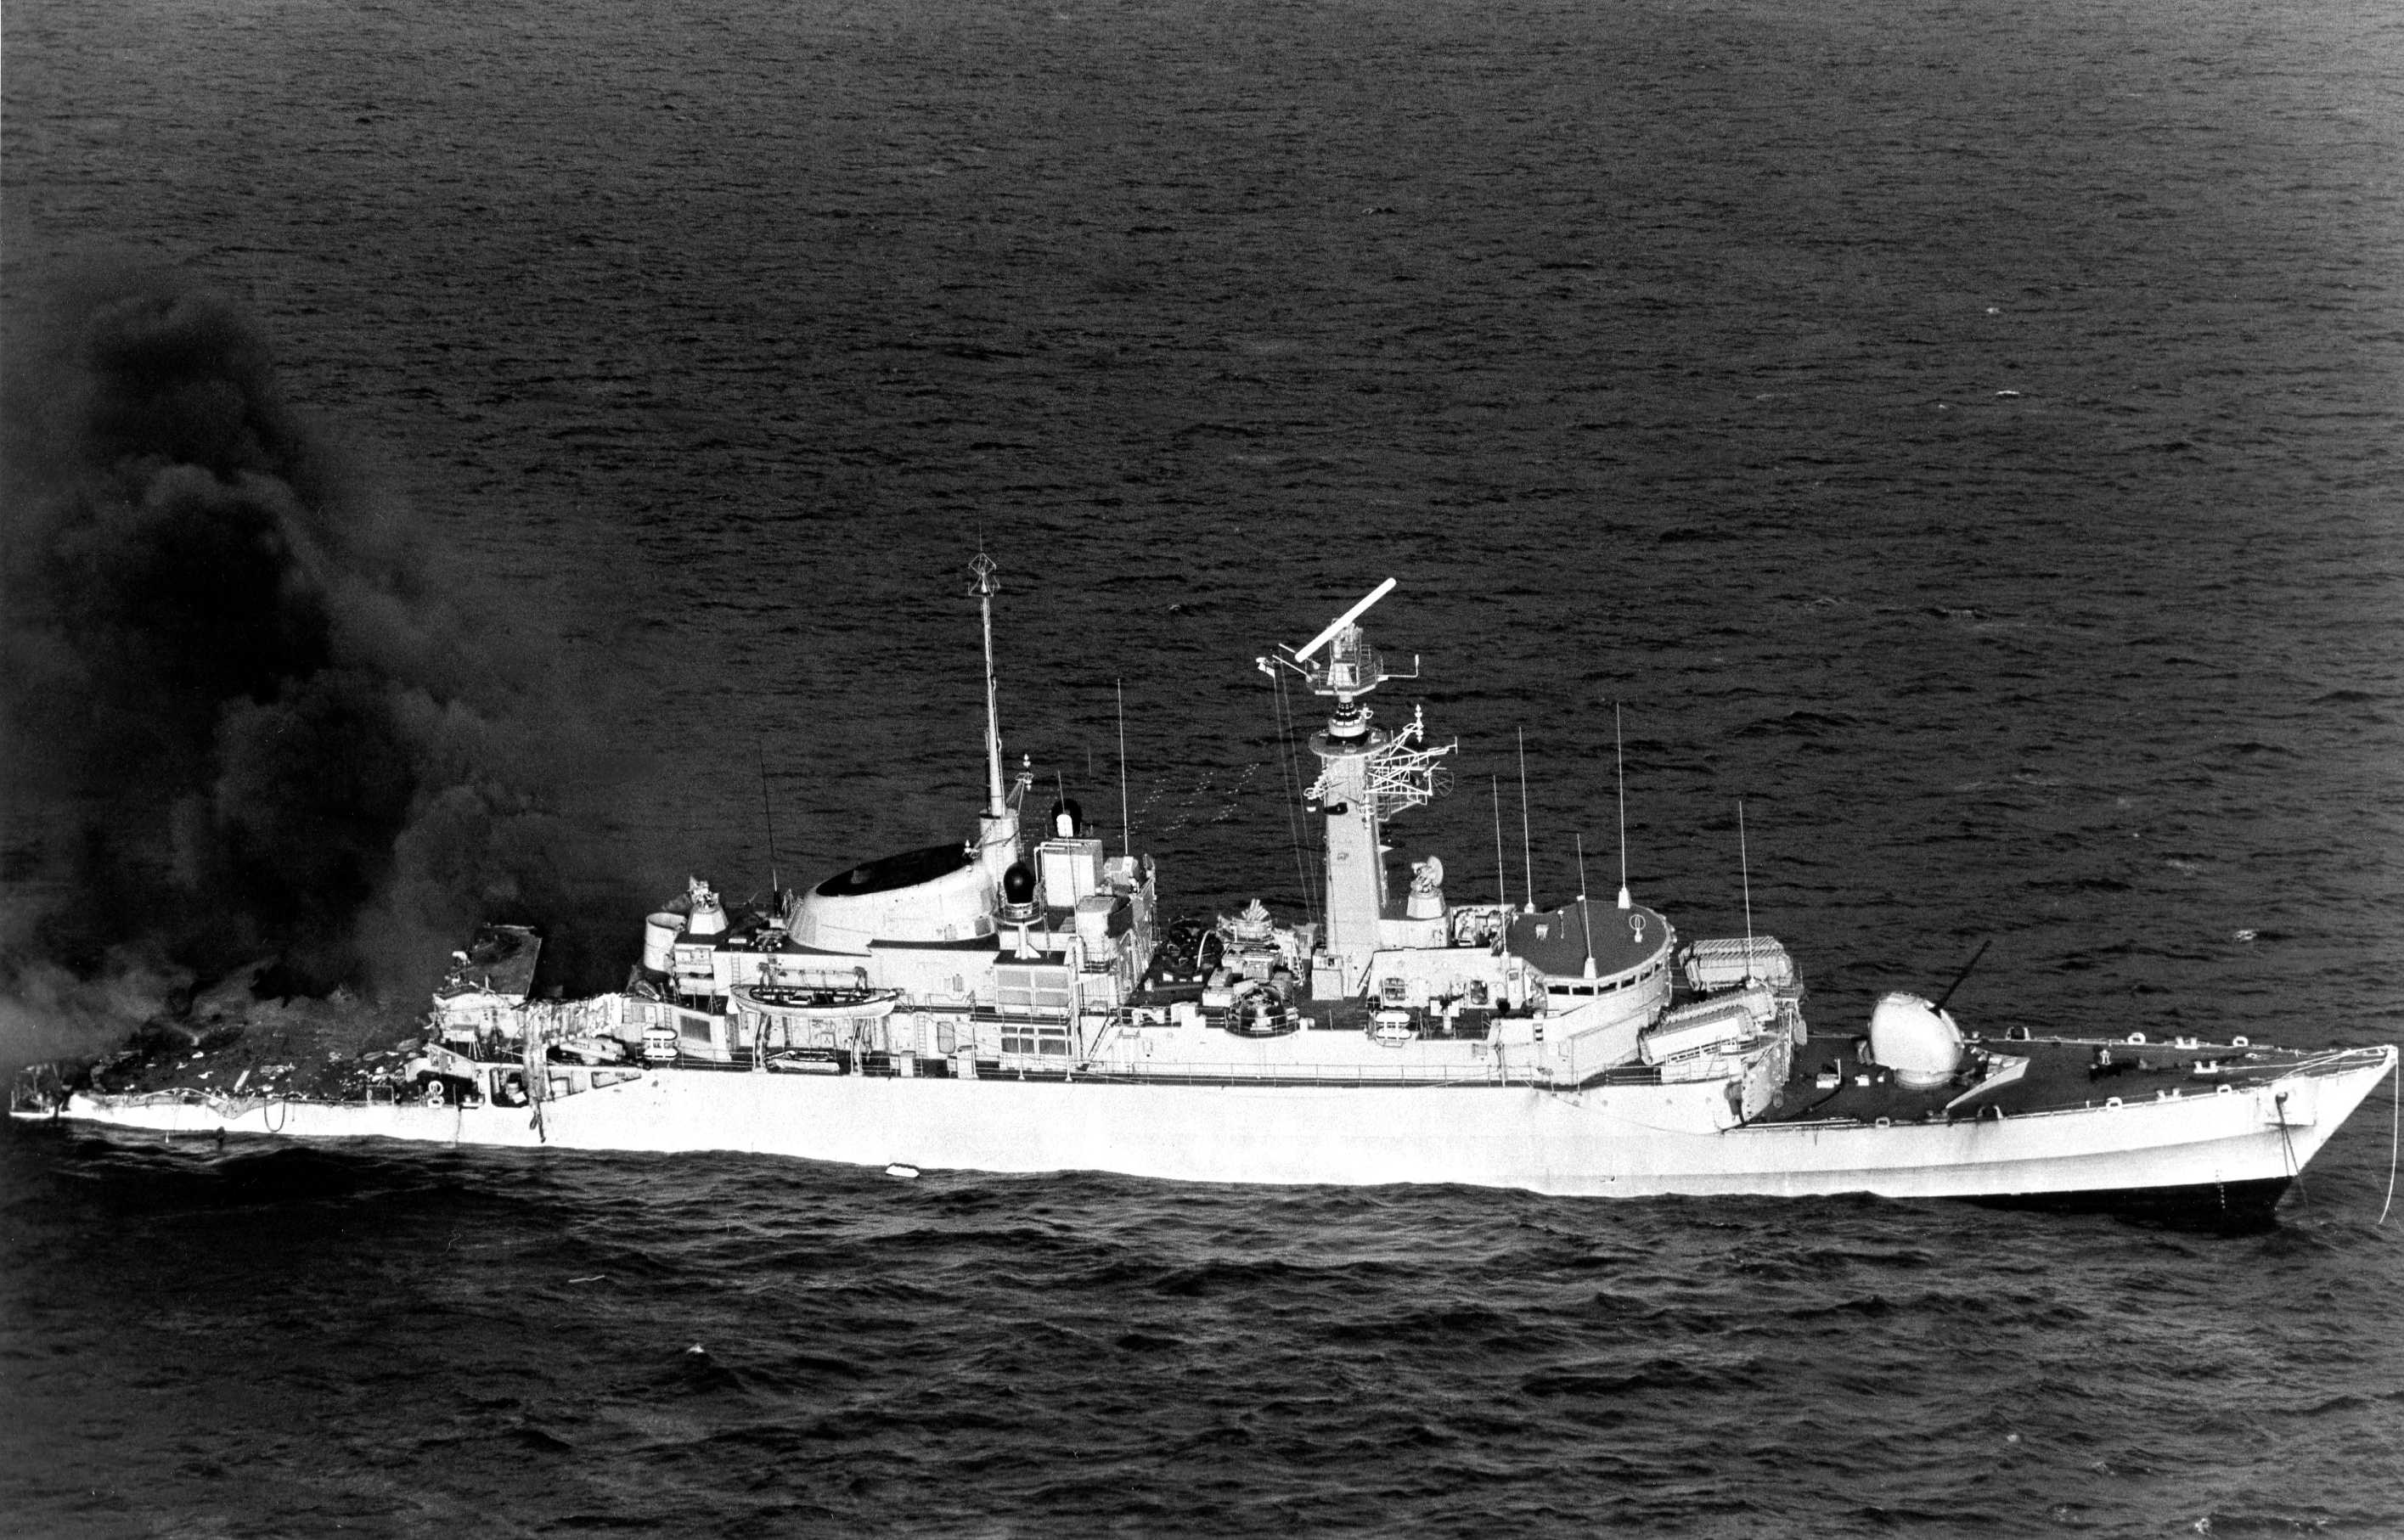 Ship on Fire in the Falklands - Malvainas War 1982